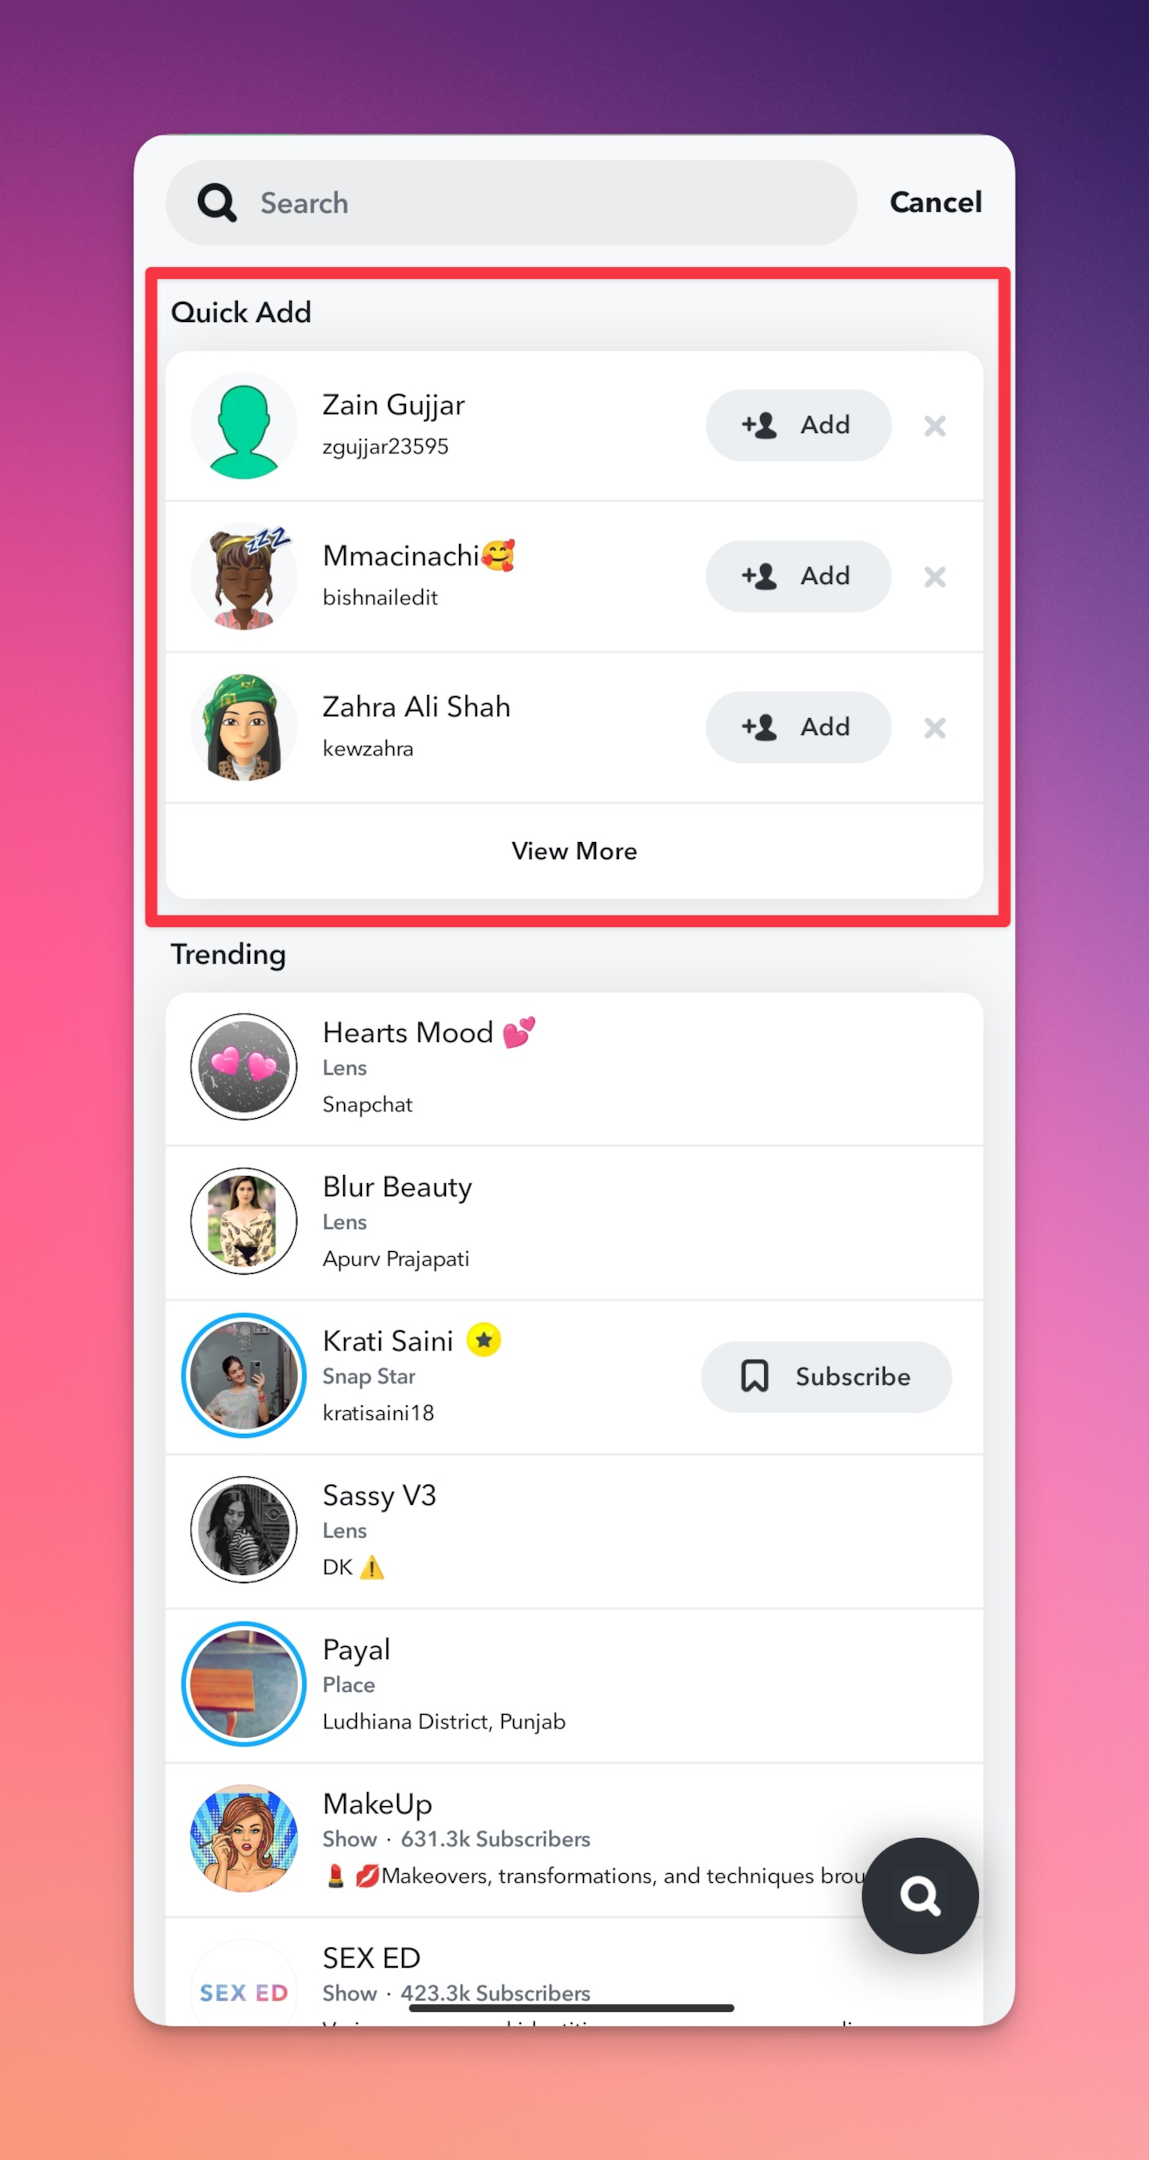 Remote.tools showing to add friends on Snapchat using "Quick add" feature. This feature is useful to add selected friend to your snapchat network. Simply press add icon to add anyone from the list as friends on Snapchat.